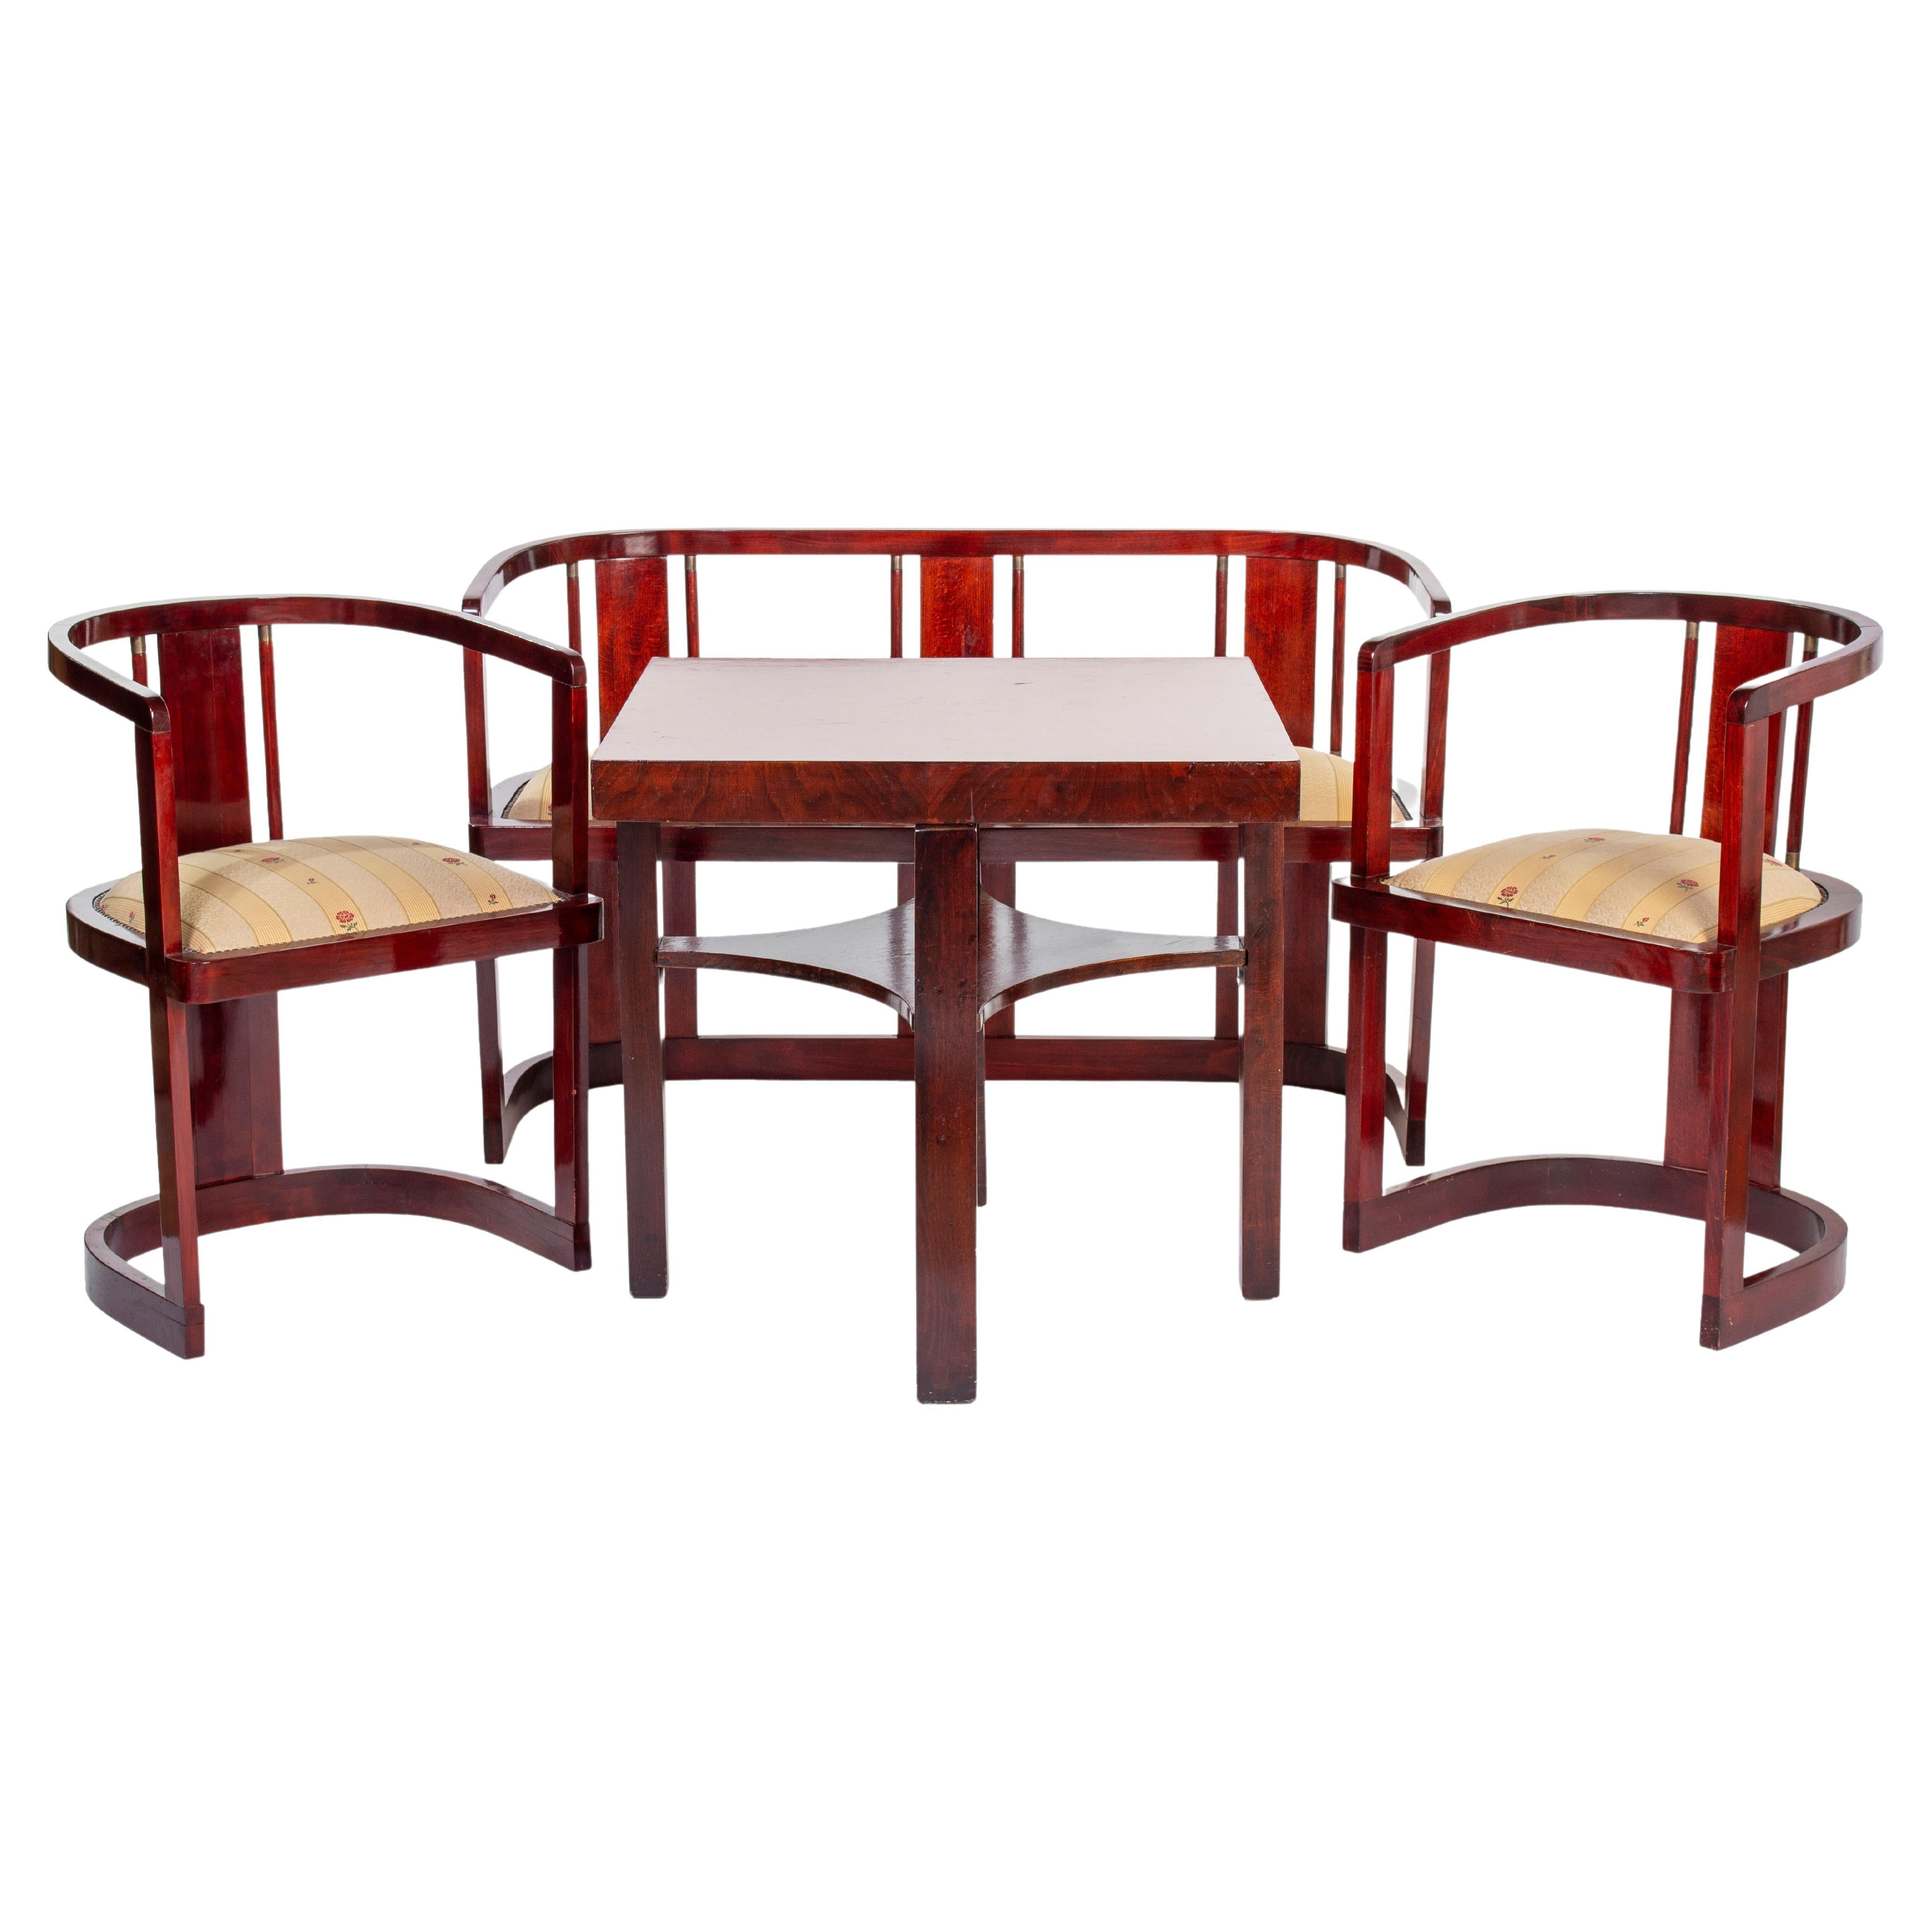 Art Deco Seating Ensemble, Canape, Armchairs and Center Table, ca. 1920